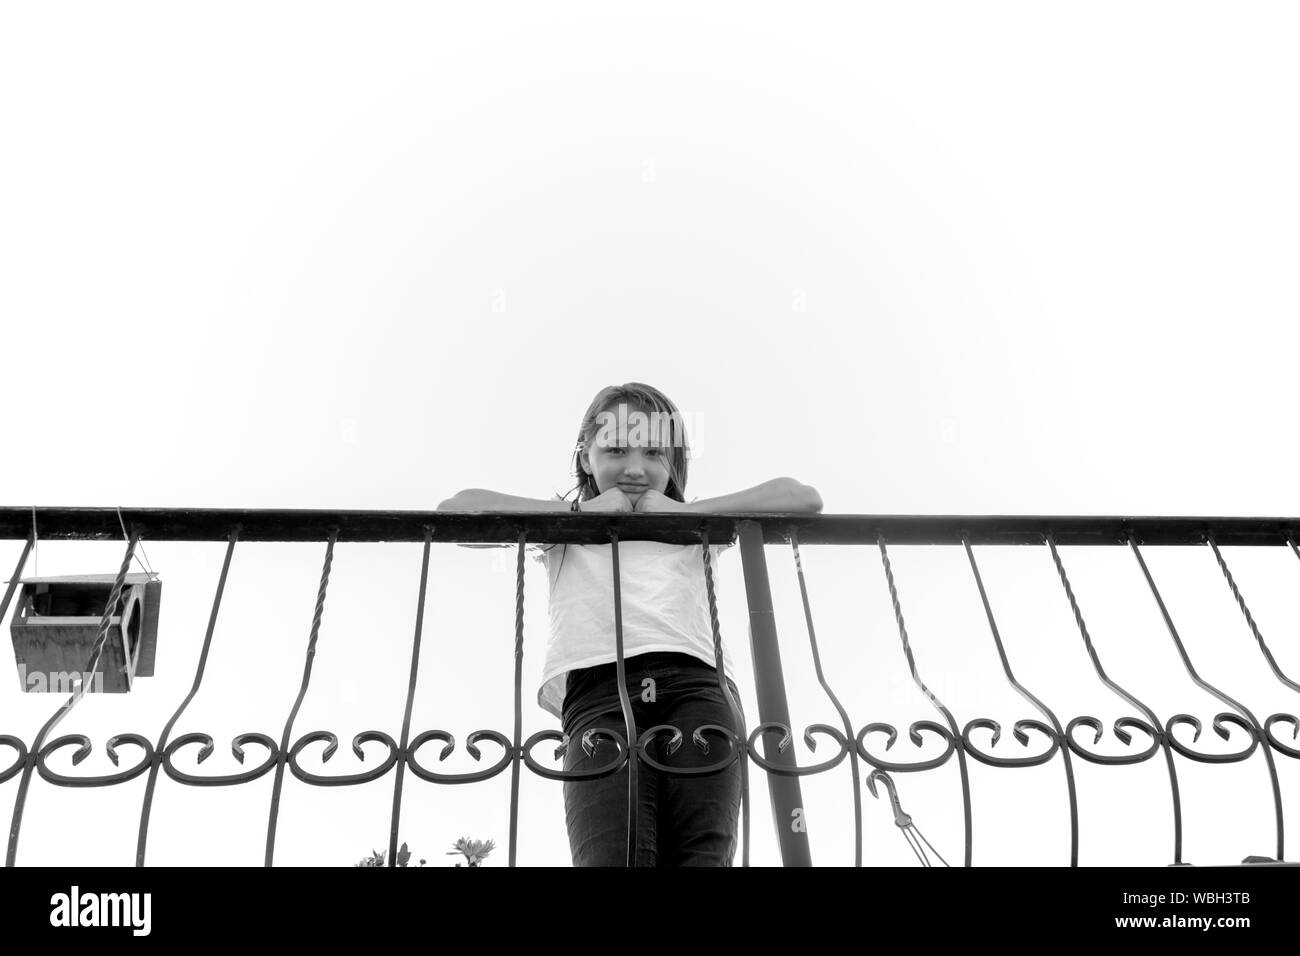 Girl 9 years old stand near the iron fence. Photo taken from below. Black White. Stock Photo